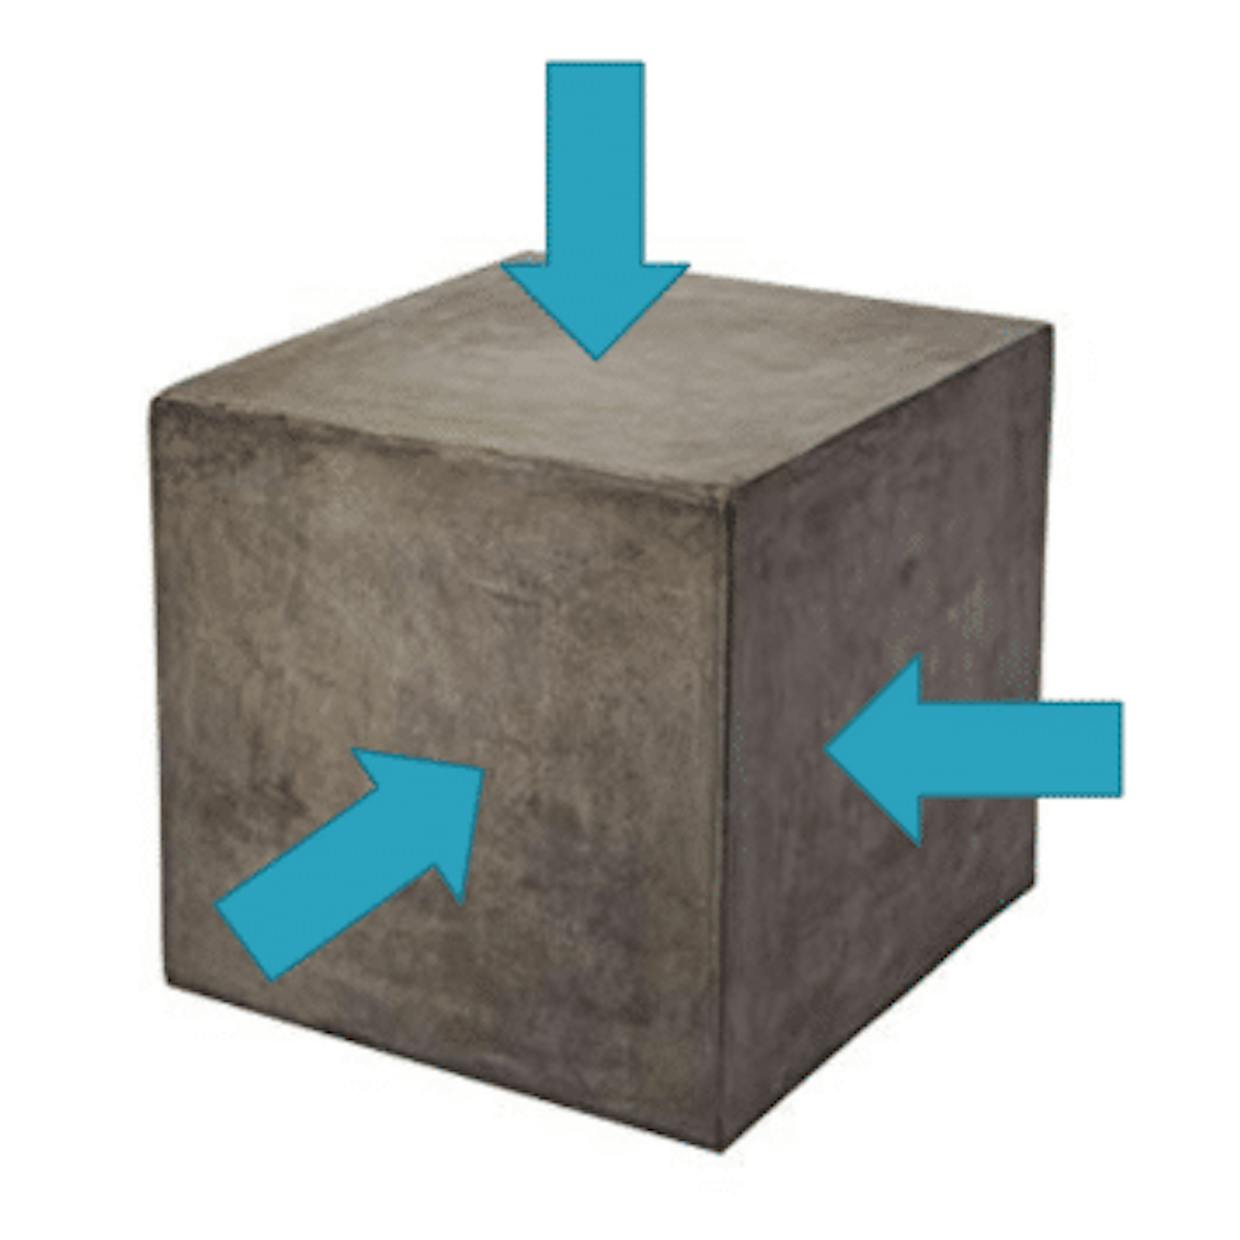 What is meant by Theoretical Thickness in Concrete?